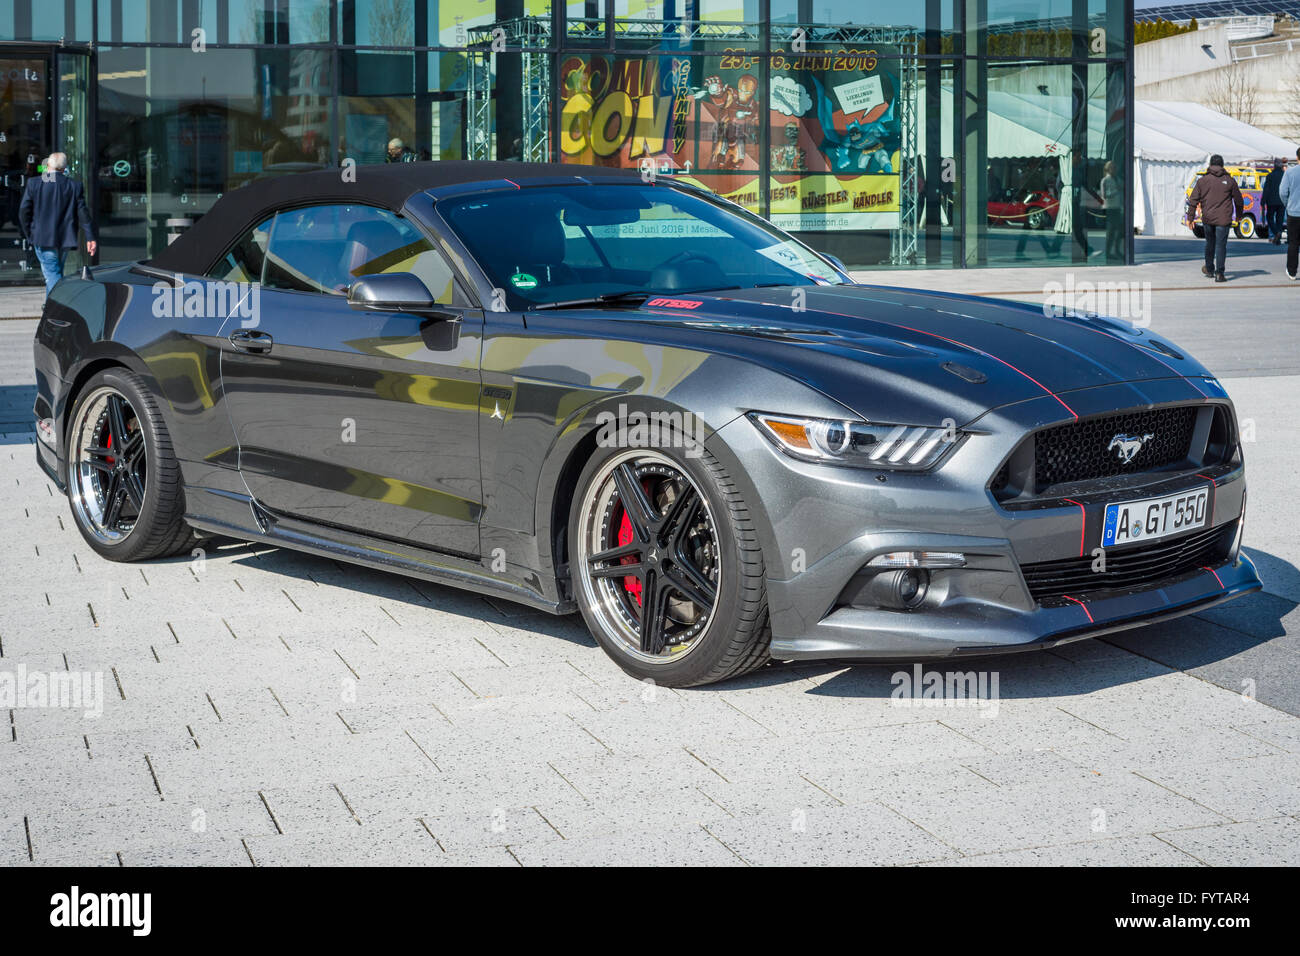 Muscle-Car Ford Mustang GT 550 Aero Edition, 2016. Stockfoto